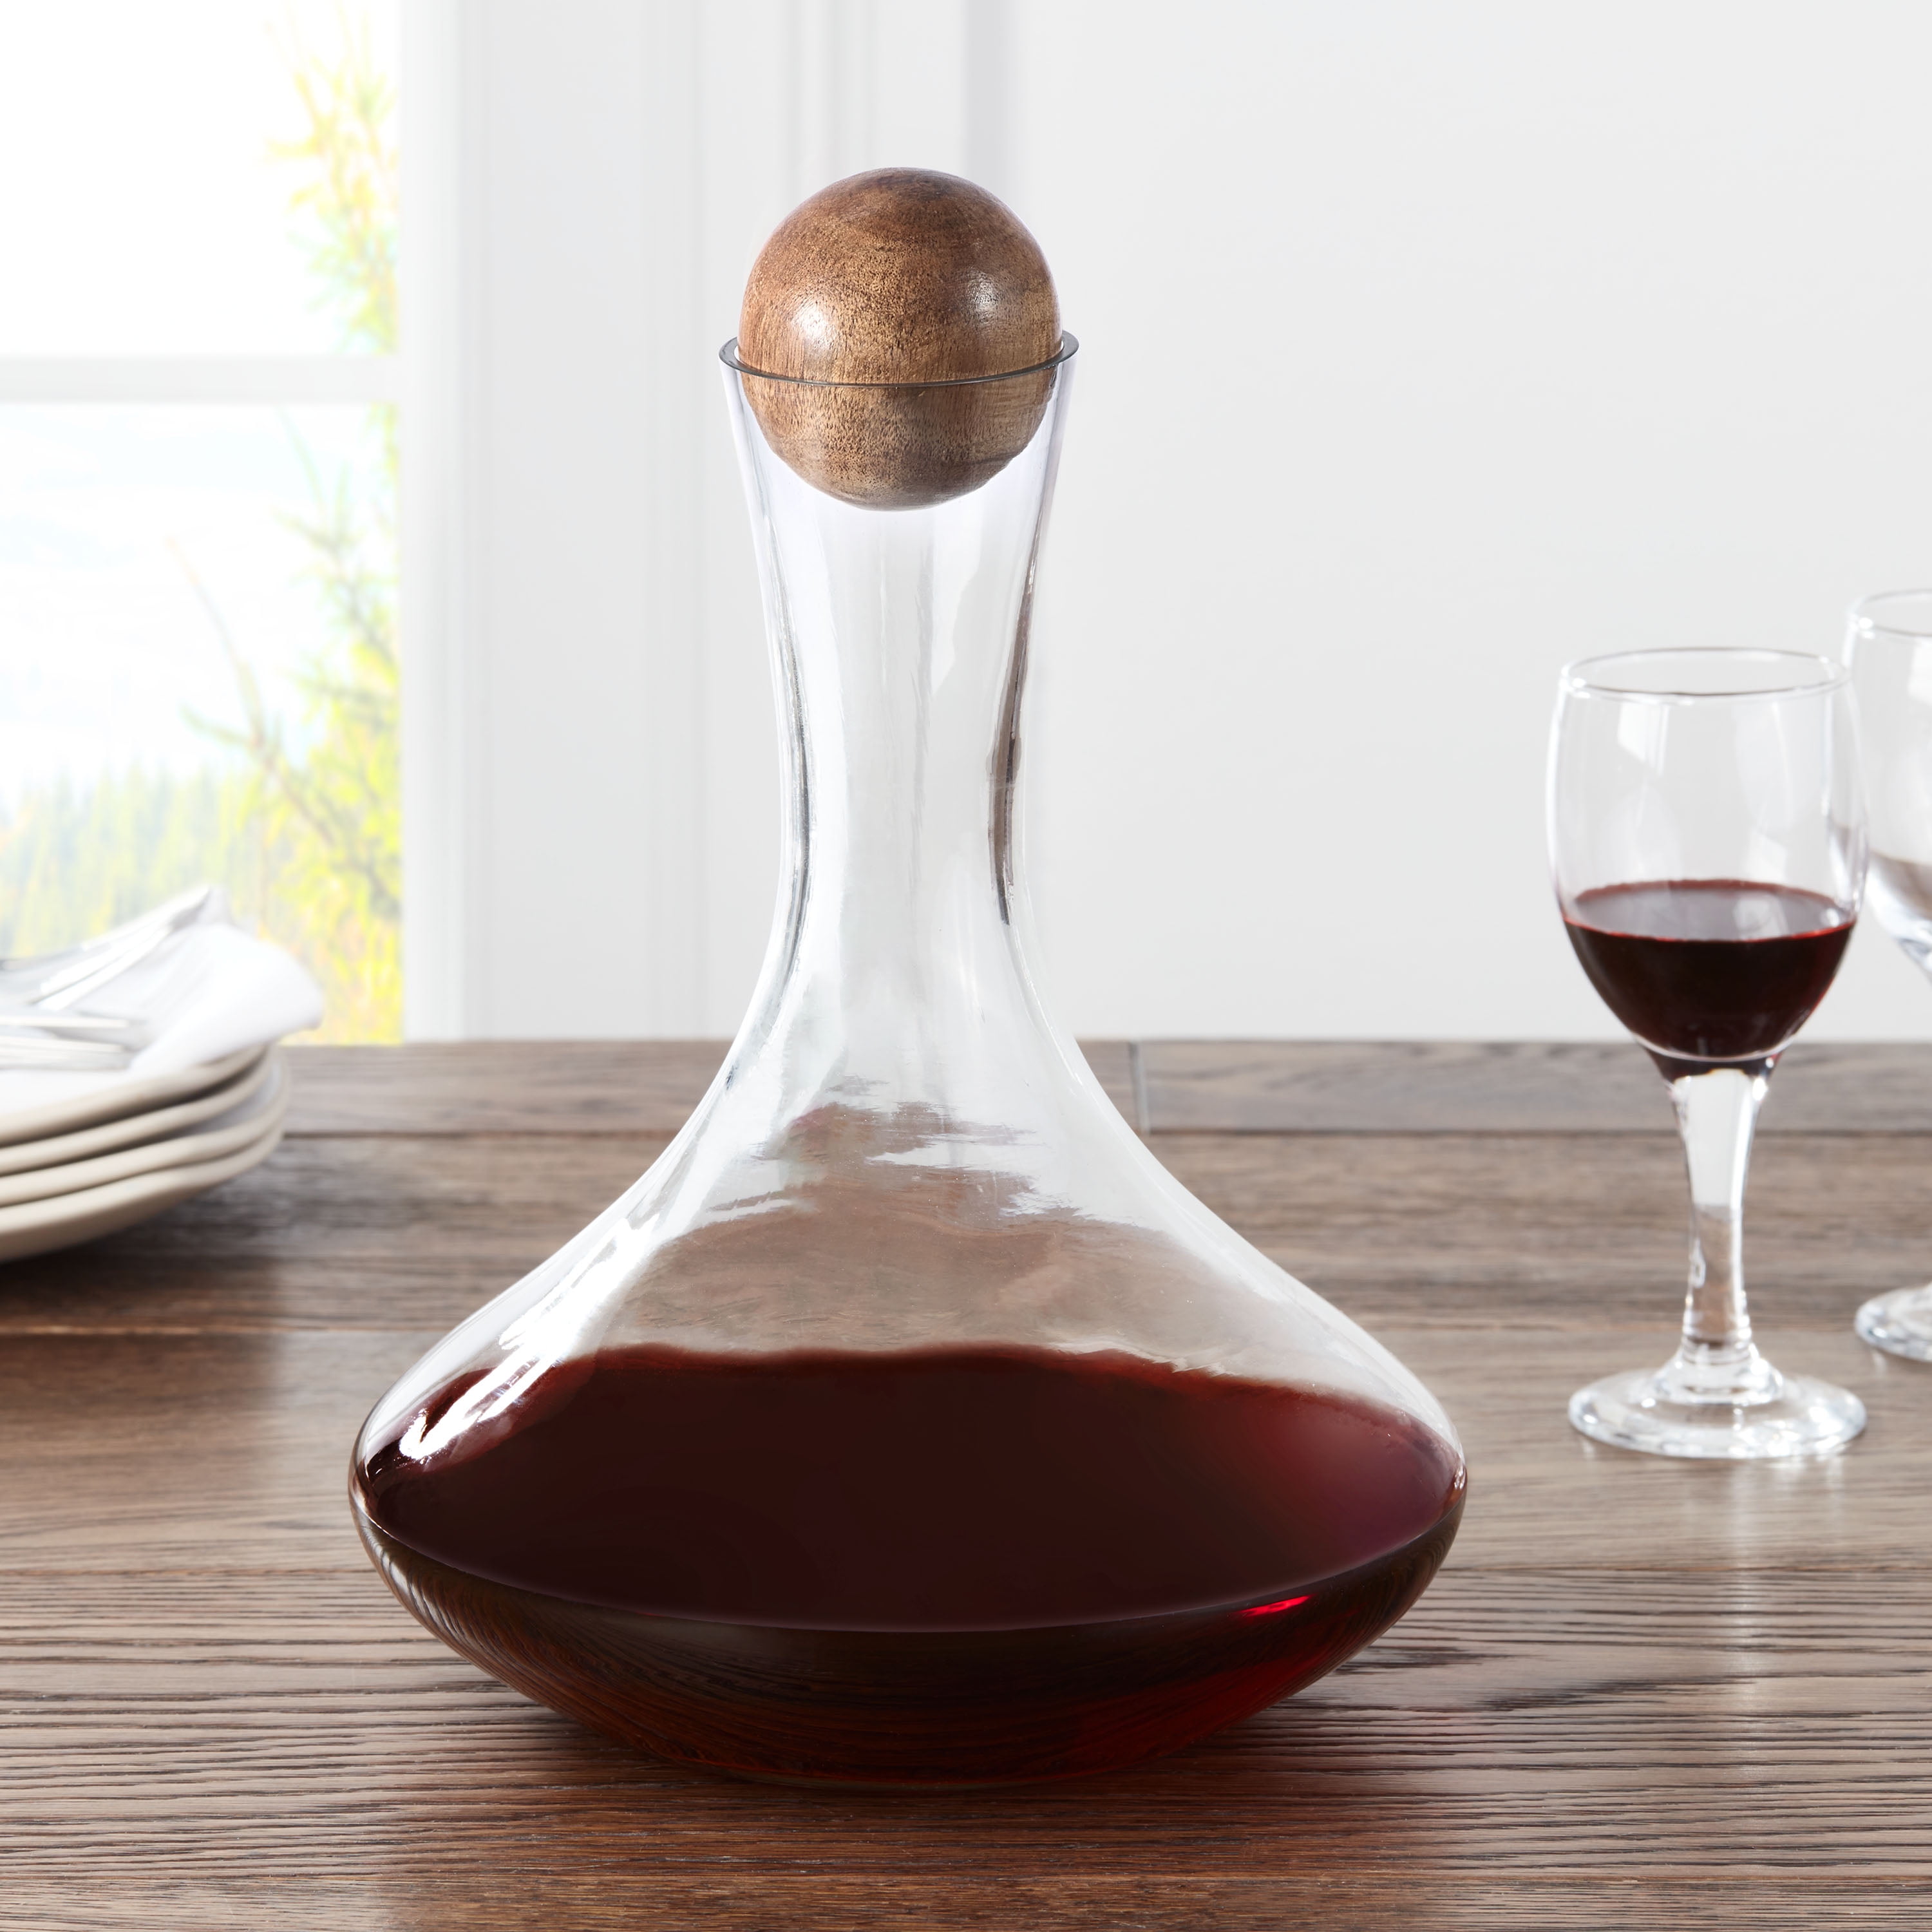 Glass Decanter with Beech Wood Lid